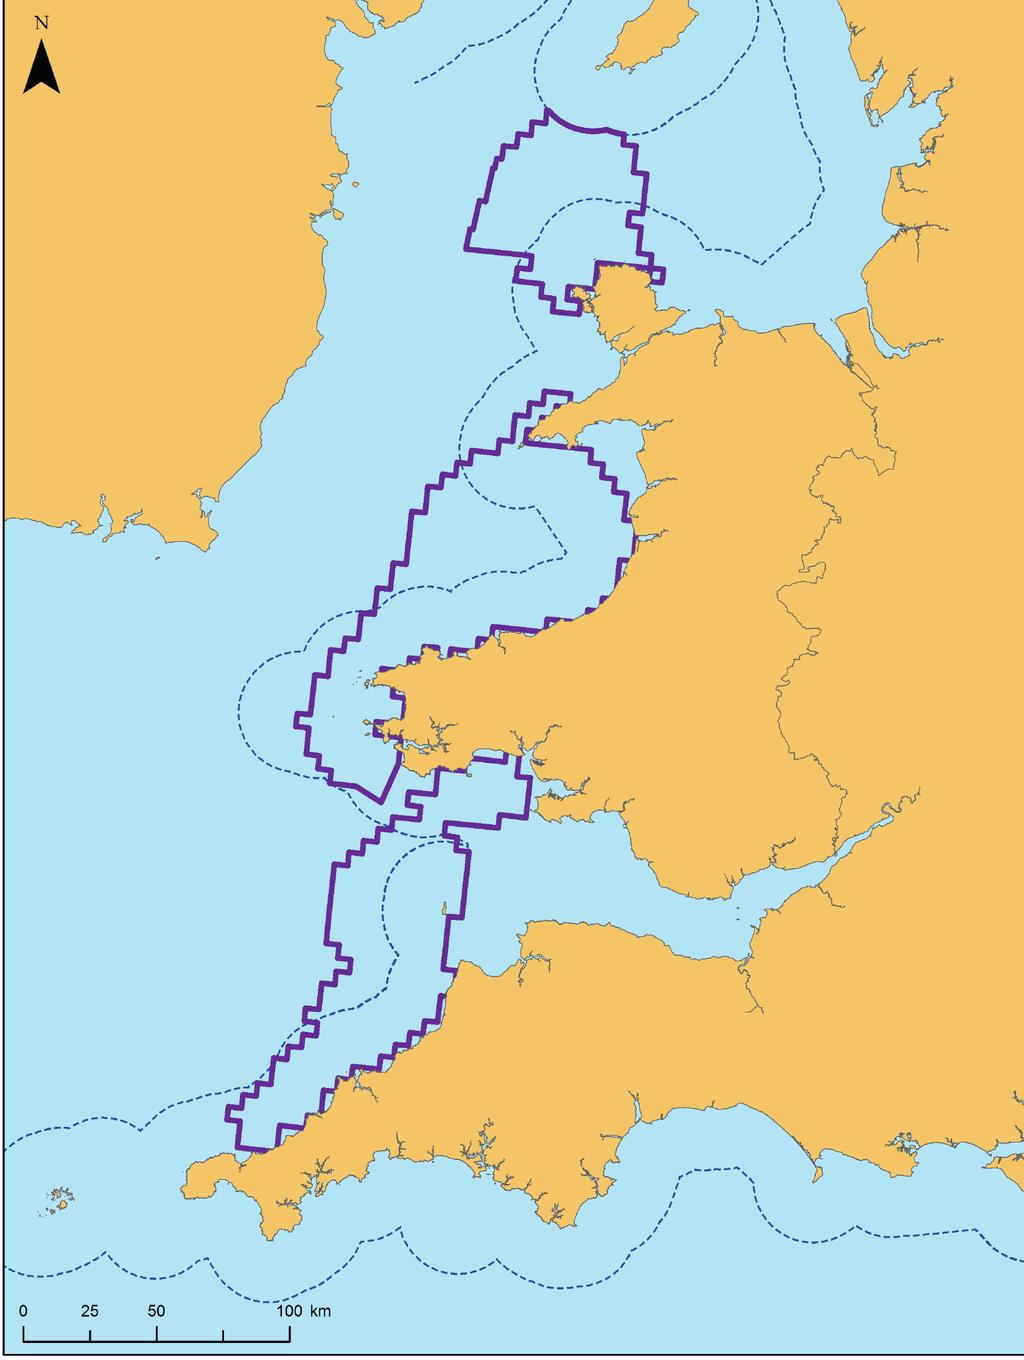 Areas around Wales under consideration as possible new marine Special Protection Areas Existing SPA s Areas being considered as possible new SPA s 2 1 Areas around Wales under consideration as